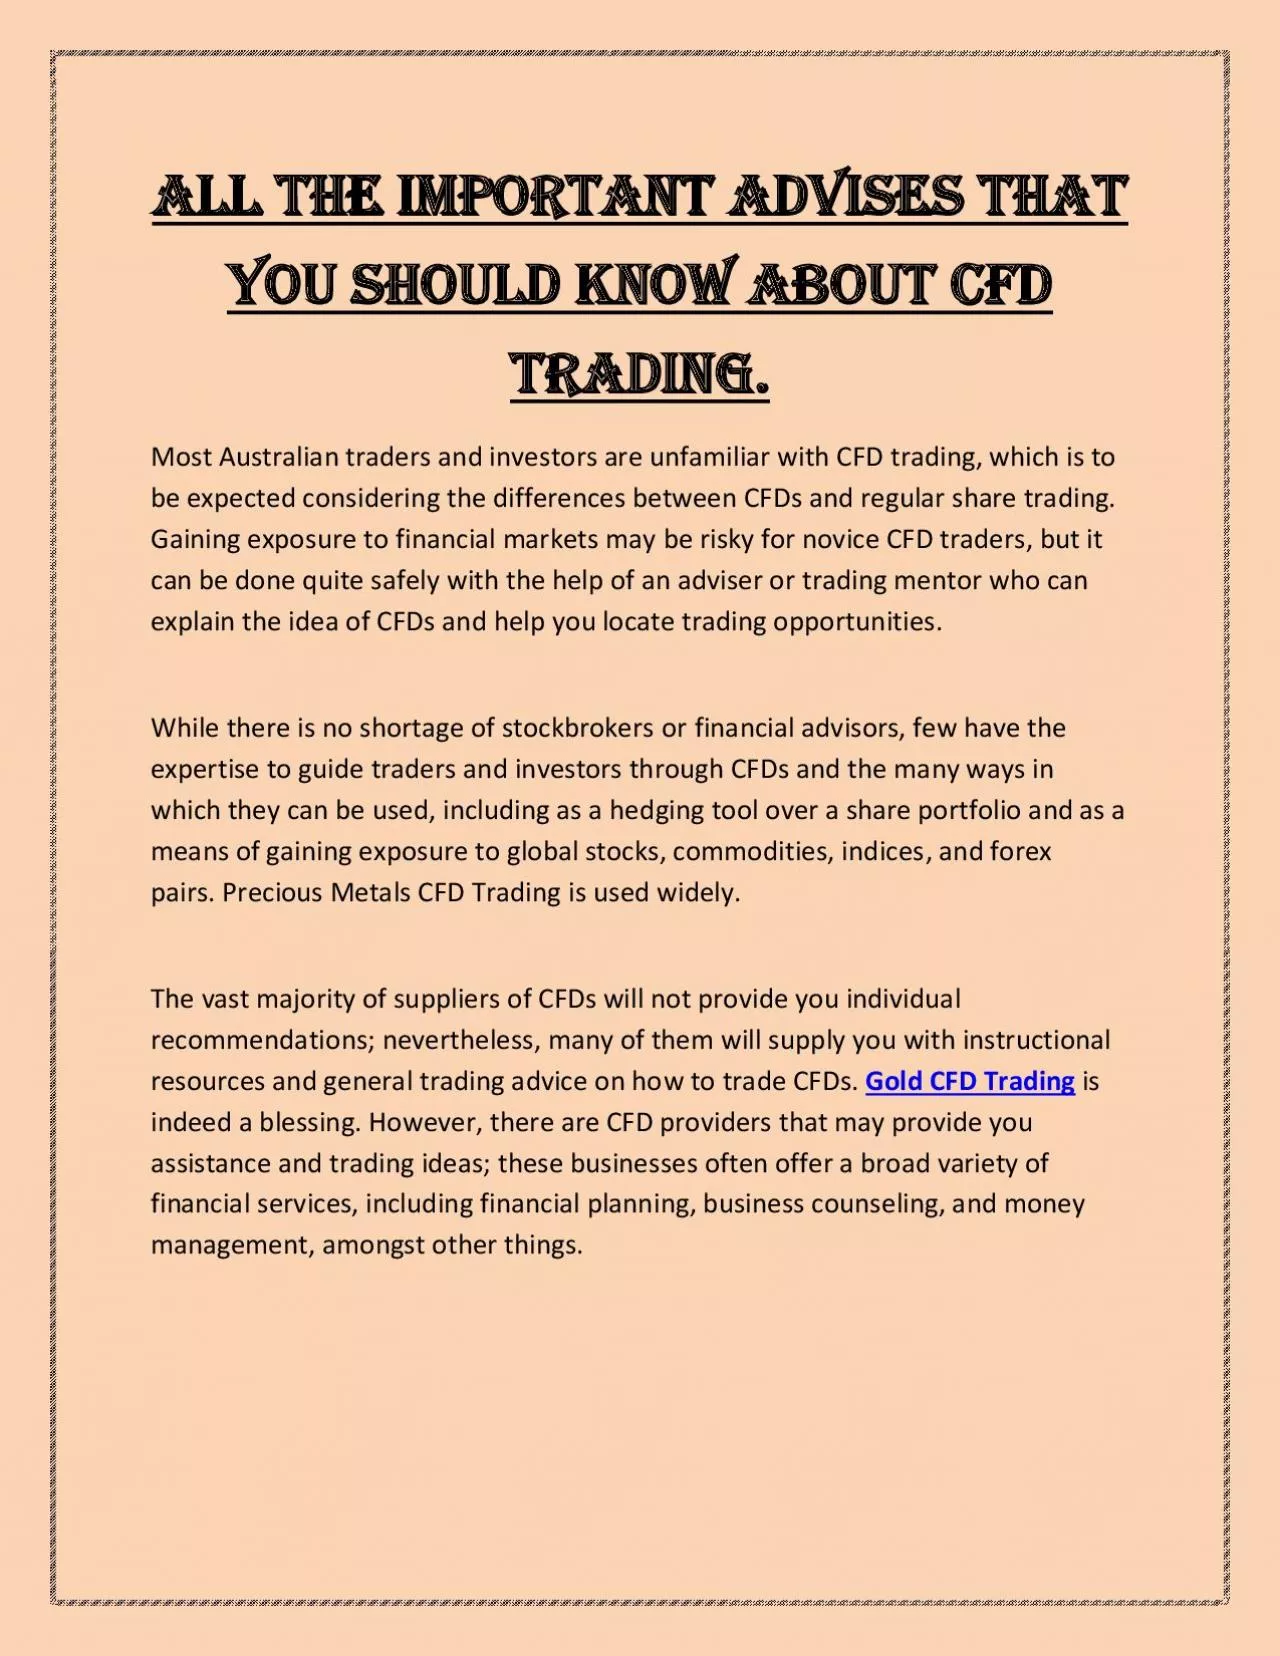 All the important advises that you should know about CFD trading.